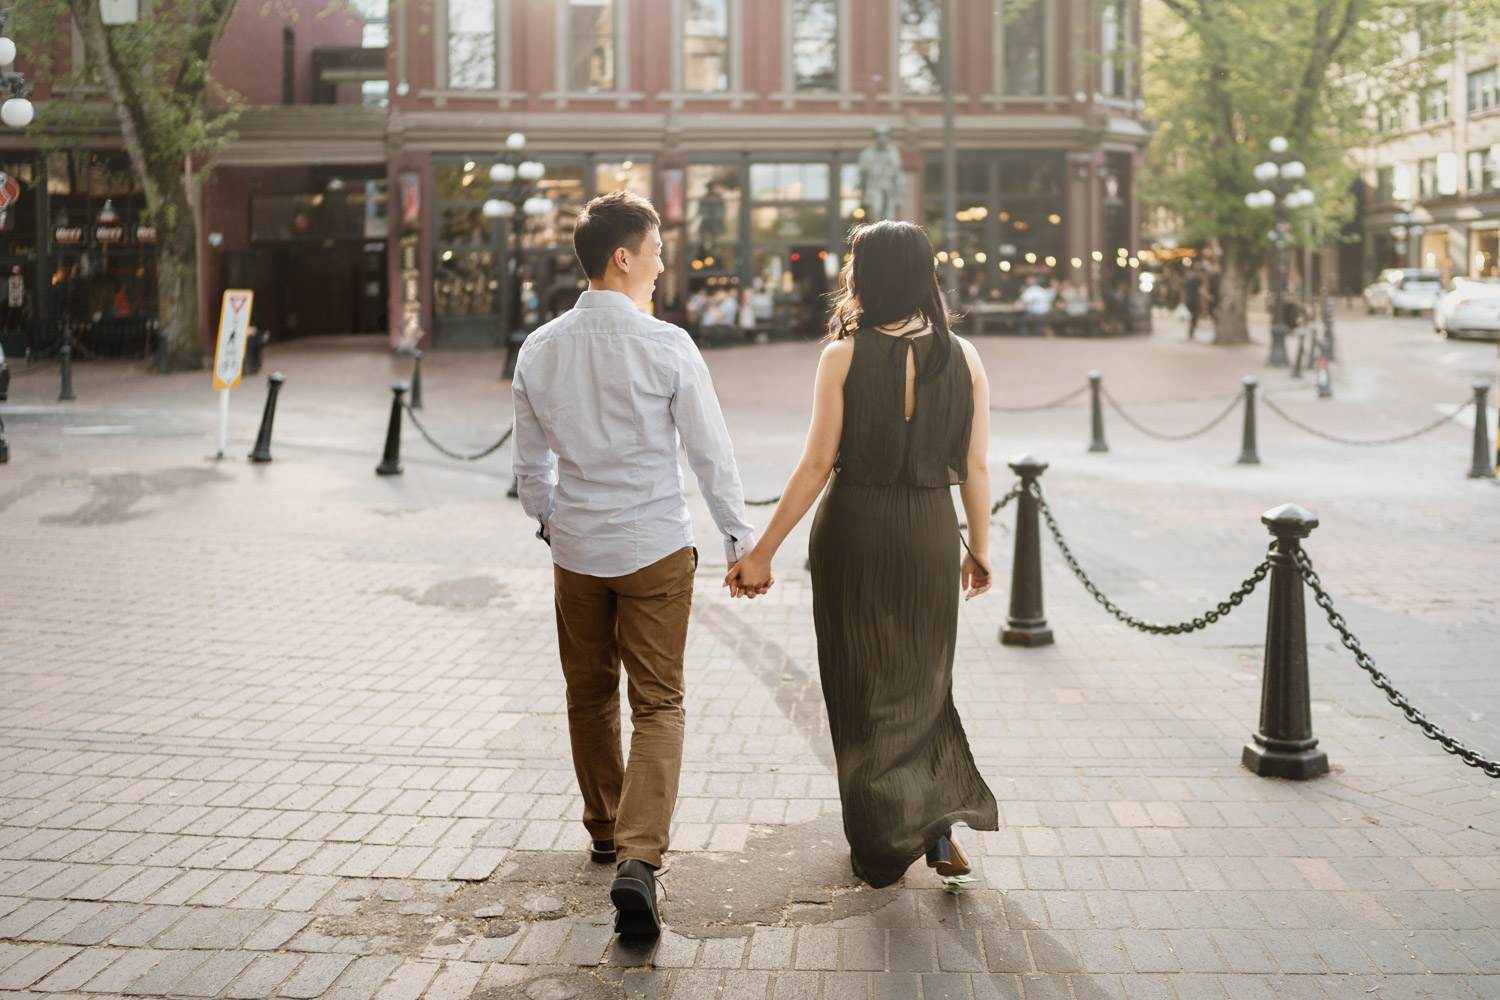 gastown engagement photography in vancouver bc during summer at sunset or golden hour